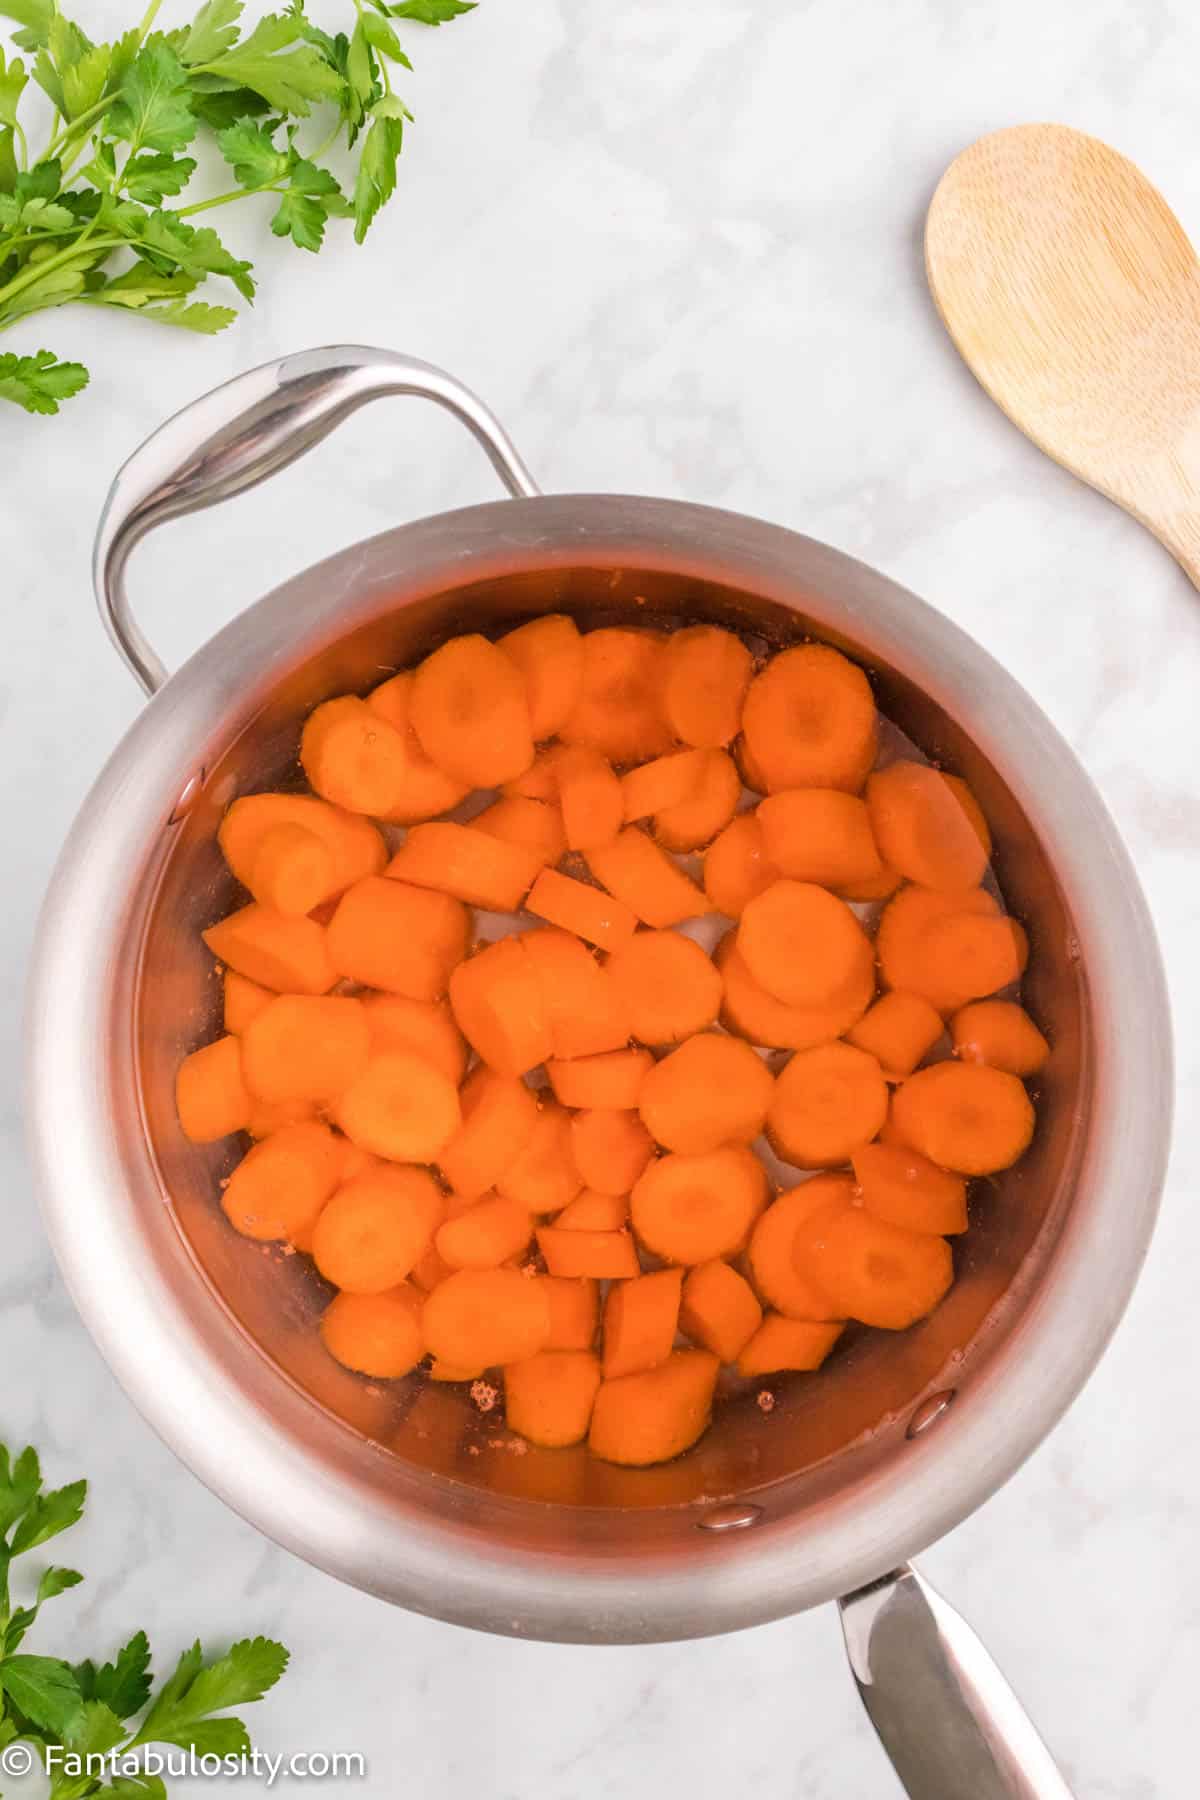 Cut carrot coins are submerged in water in a medium sized saucepan getting ready to boil